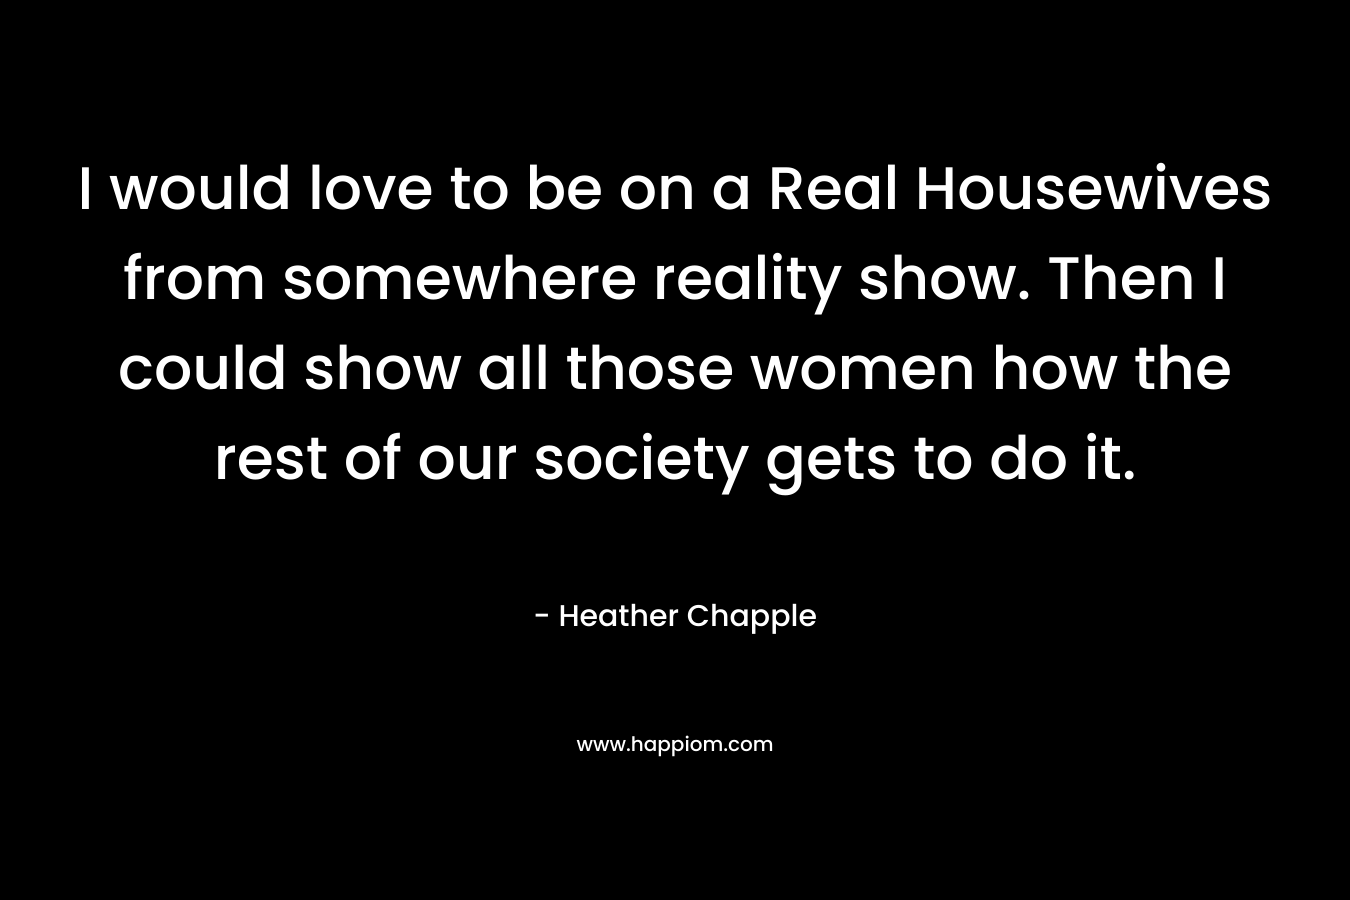 I would love to be on a Real Housewives from somewhere reality show. Then I could show all those women how the rest of our society gets to do it. – Heather Chapple